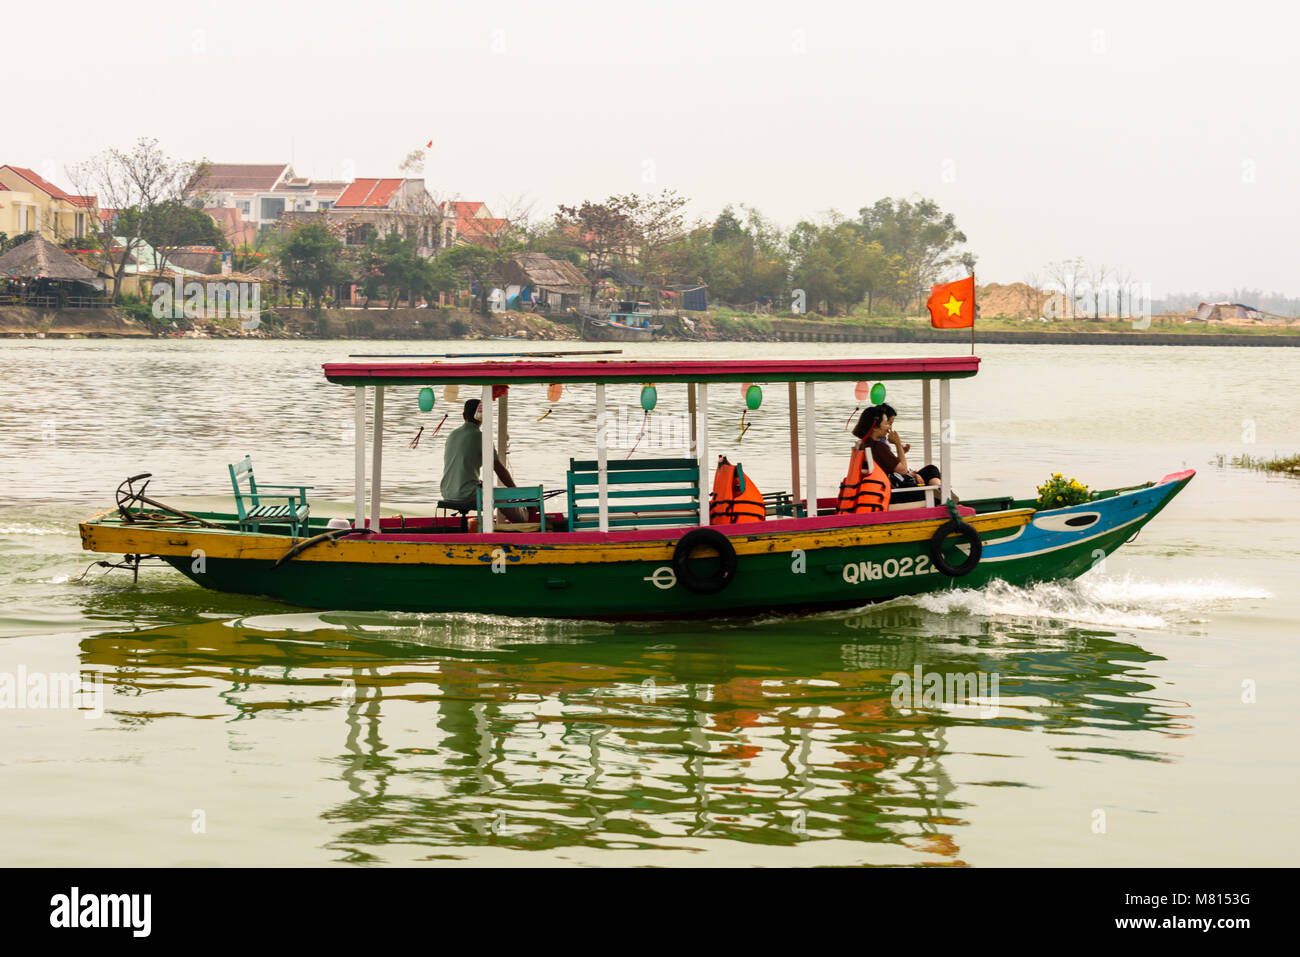 Tourist boats with Vietnamese flags at Hoi An, Vietnam Stock Photo